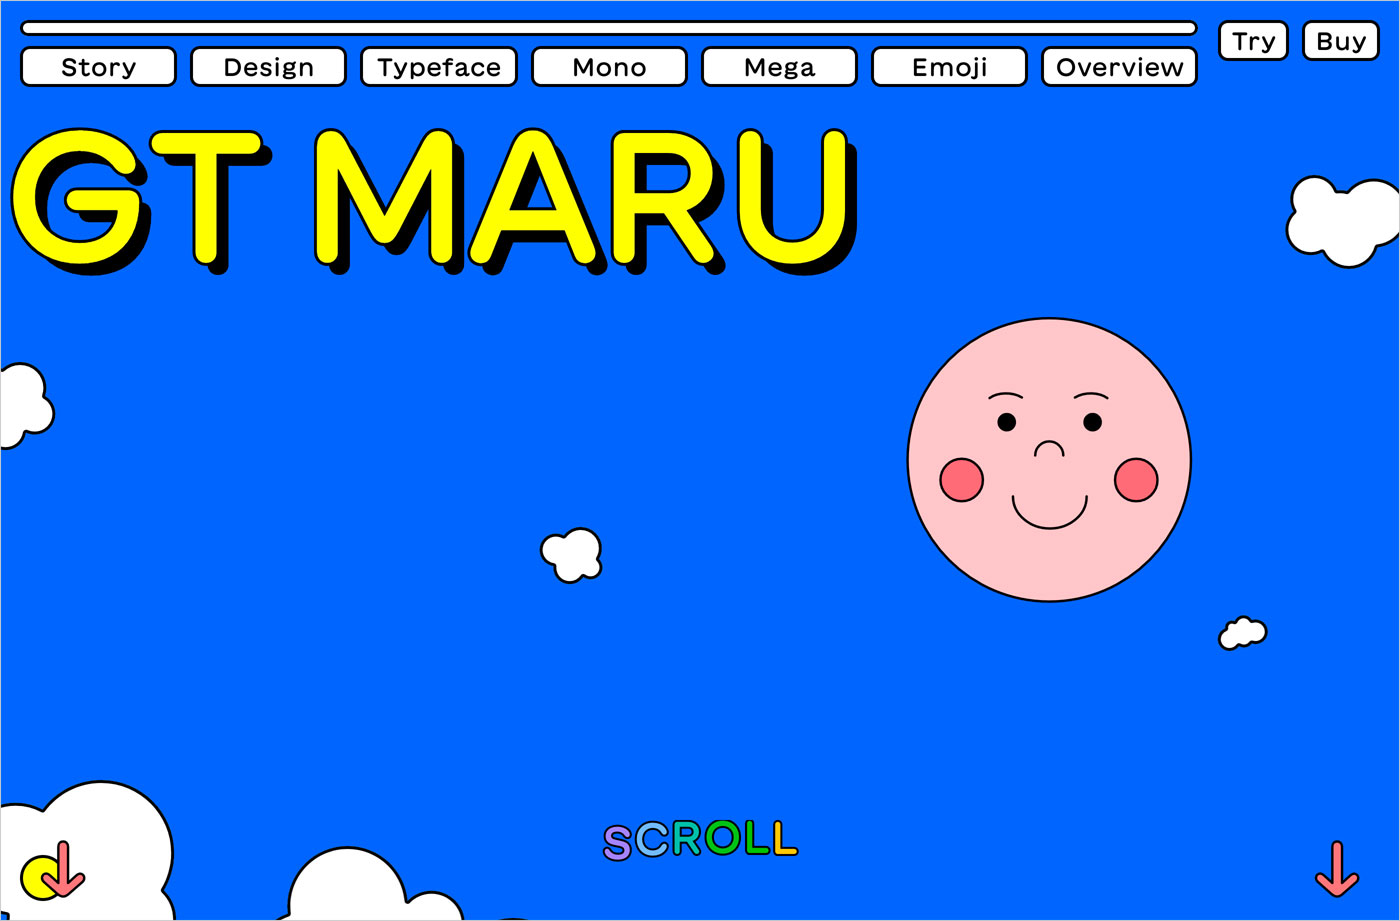 GT Maru exclusively at Grilli Type — Download Free Trial Fontsウェブサイトの画面キャプチャ画像